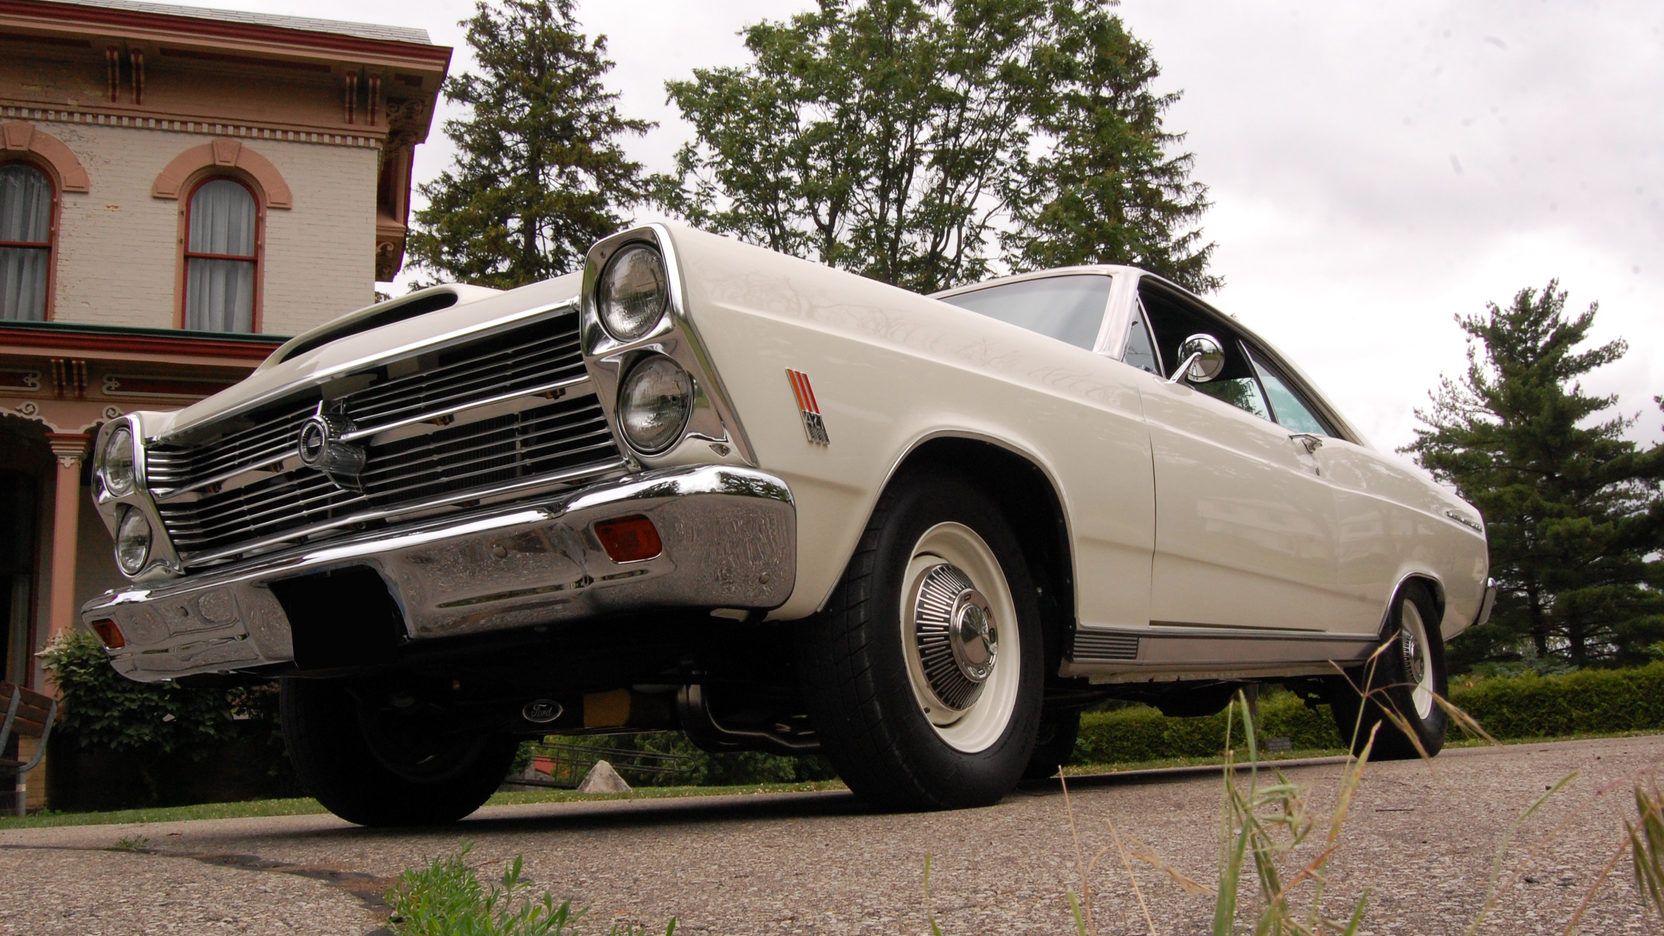 A parked 1966 Ford Farilane R-Code